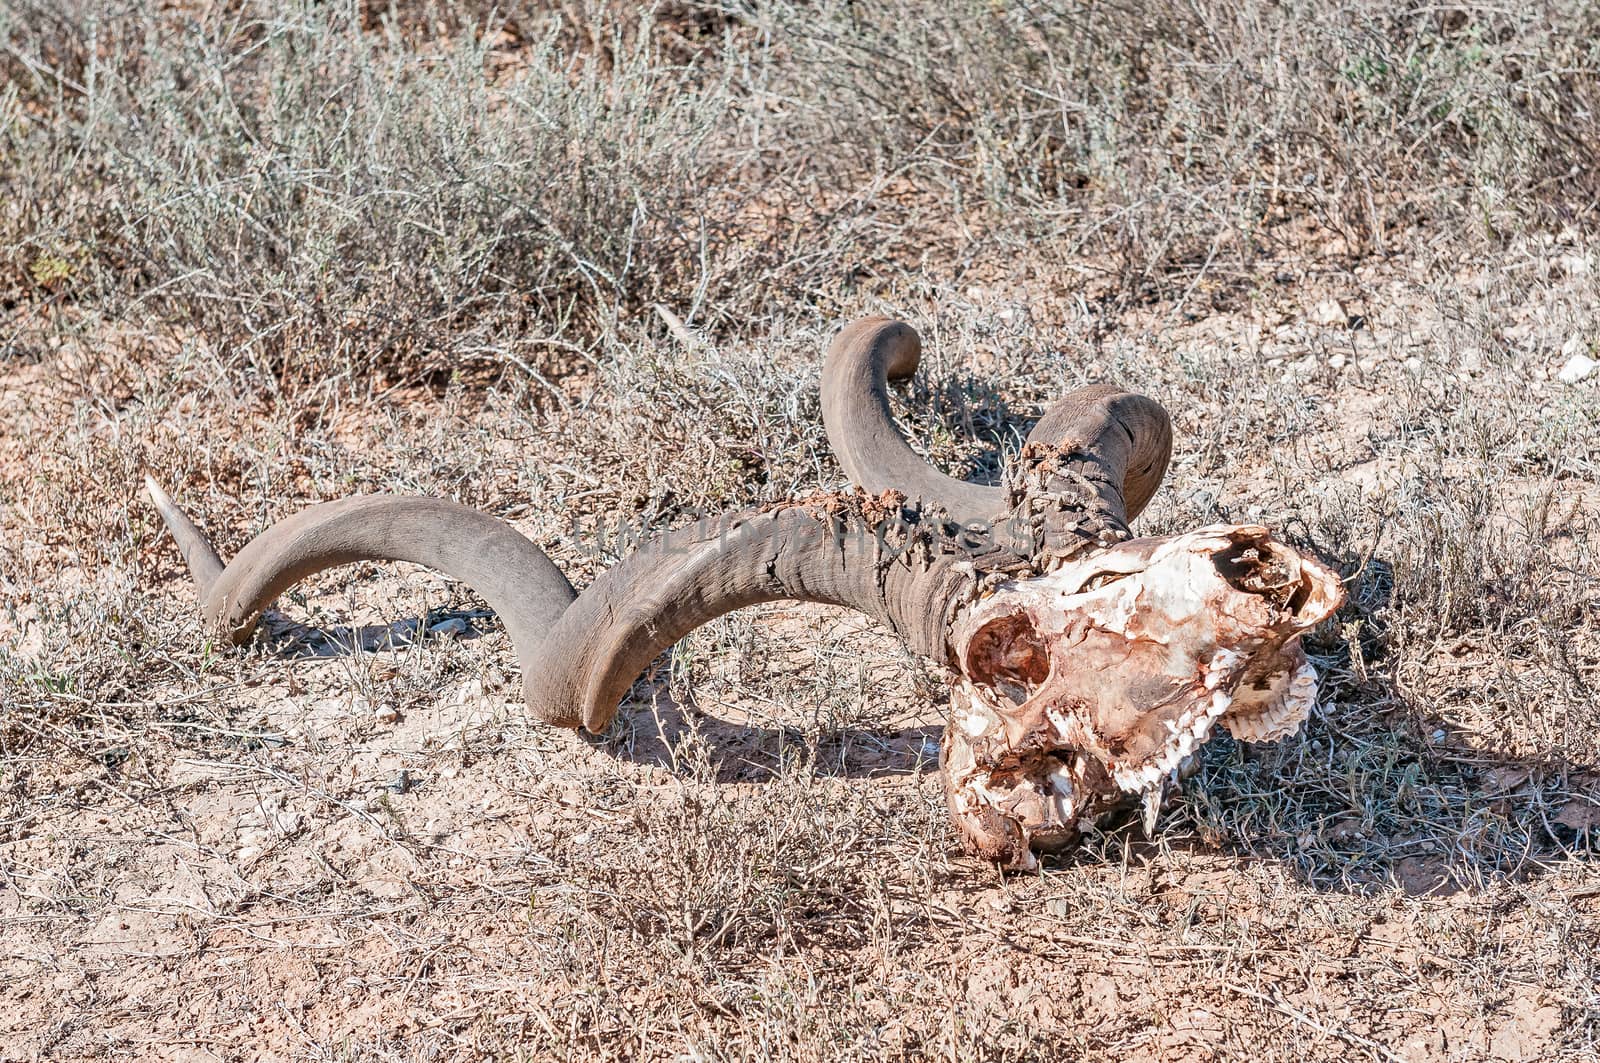 A kudu skull with horns near Domkrag Dam in the Addo Elephant National Park of South Africa